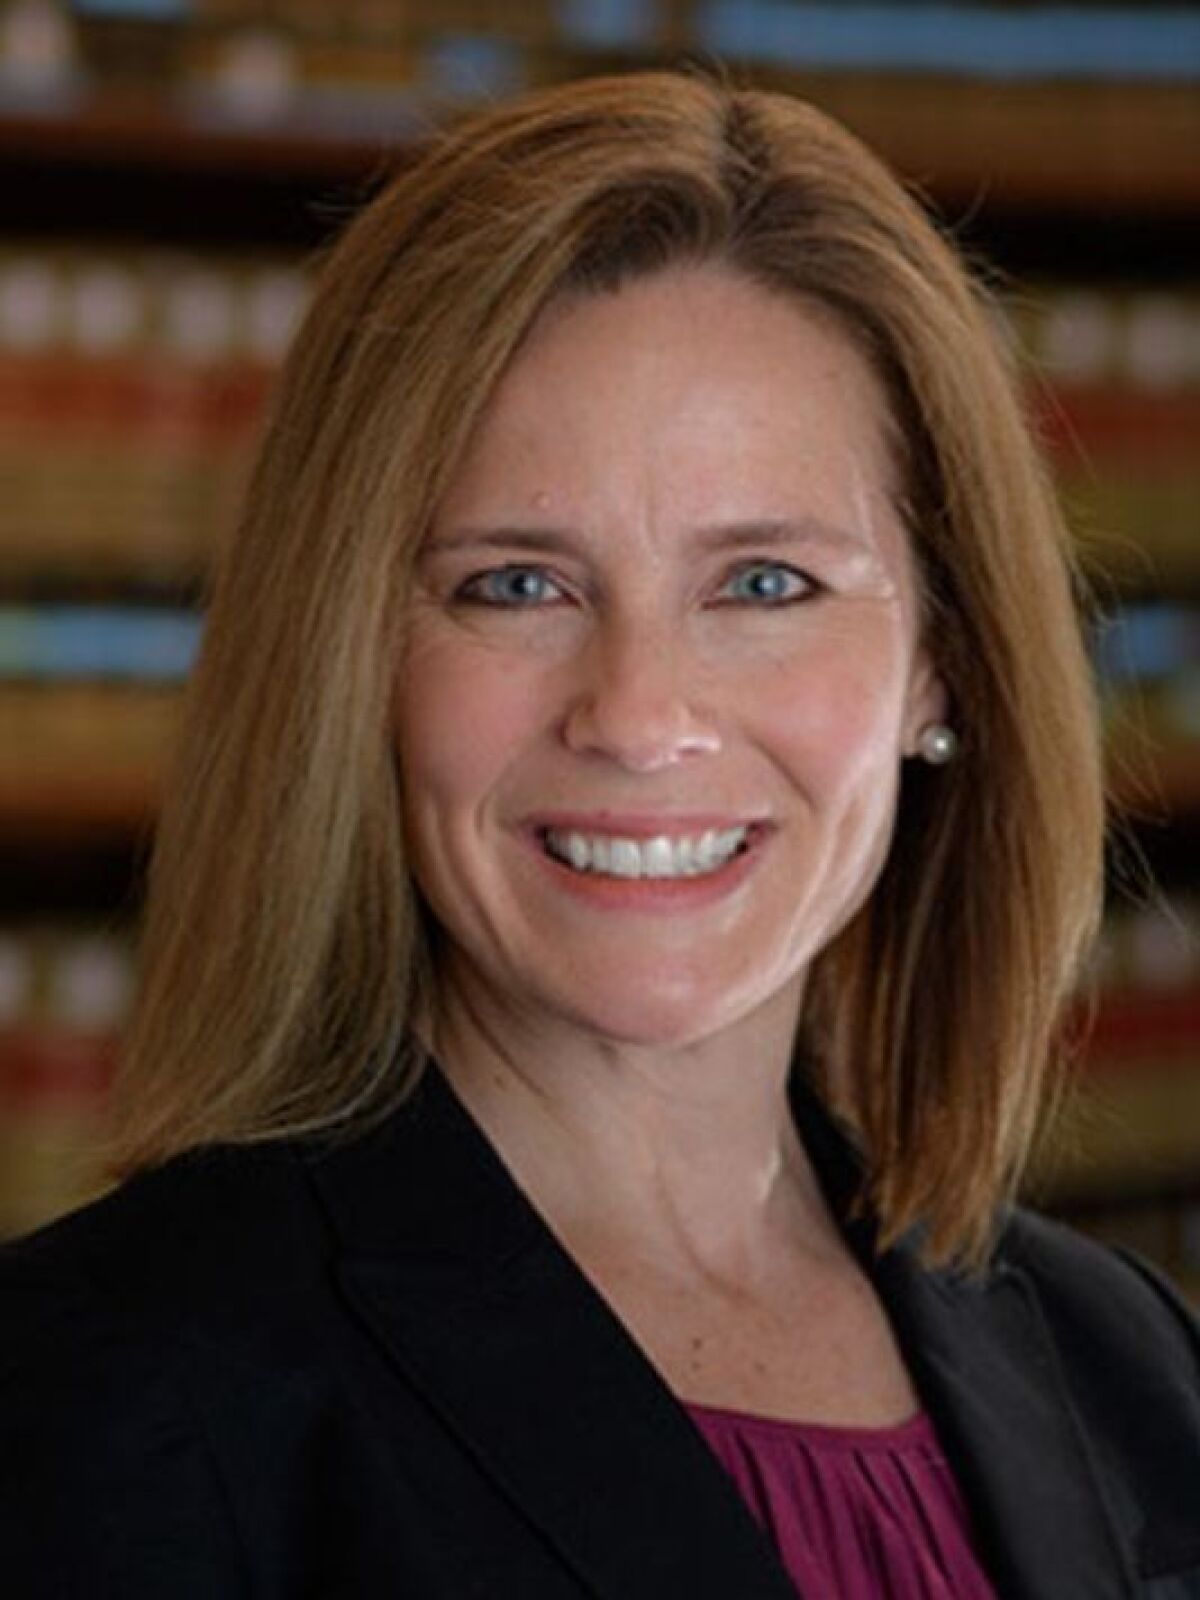 Amy Coney Barrett is a federal appeals court judge